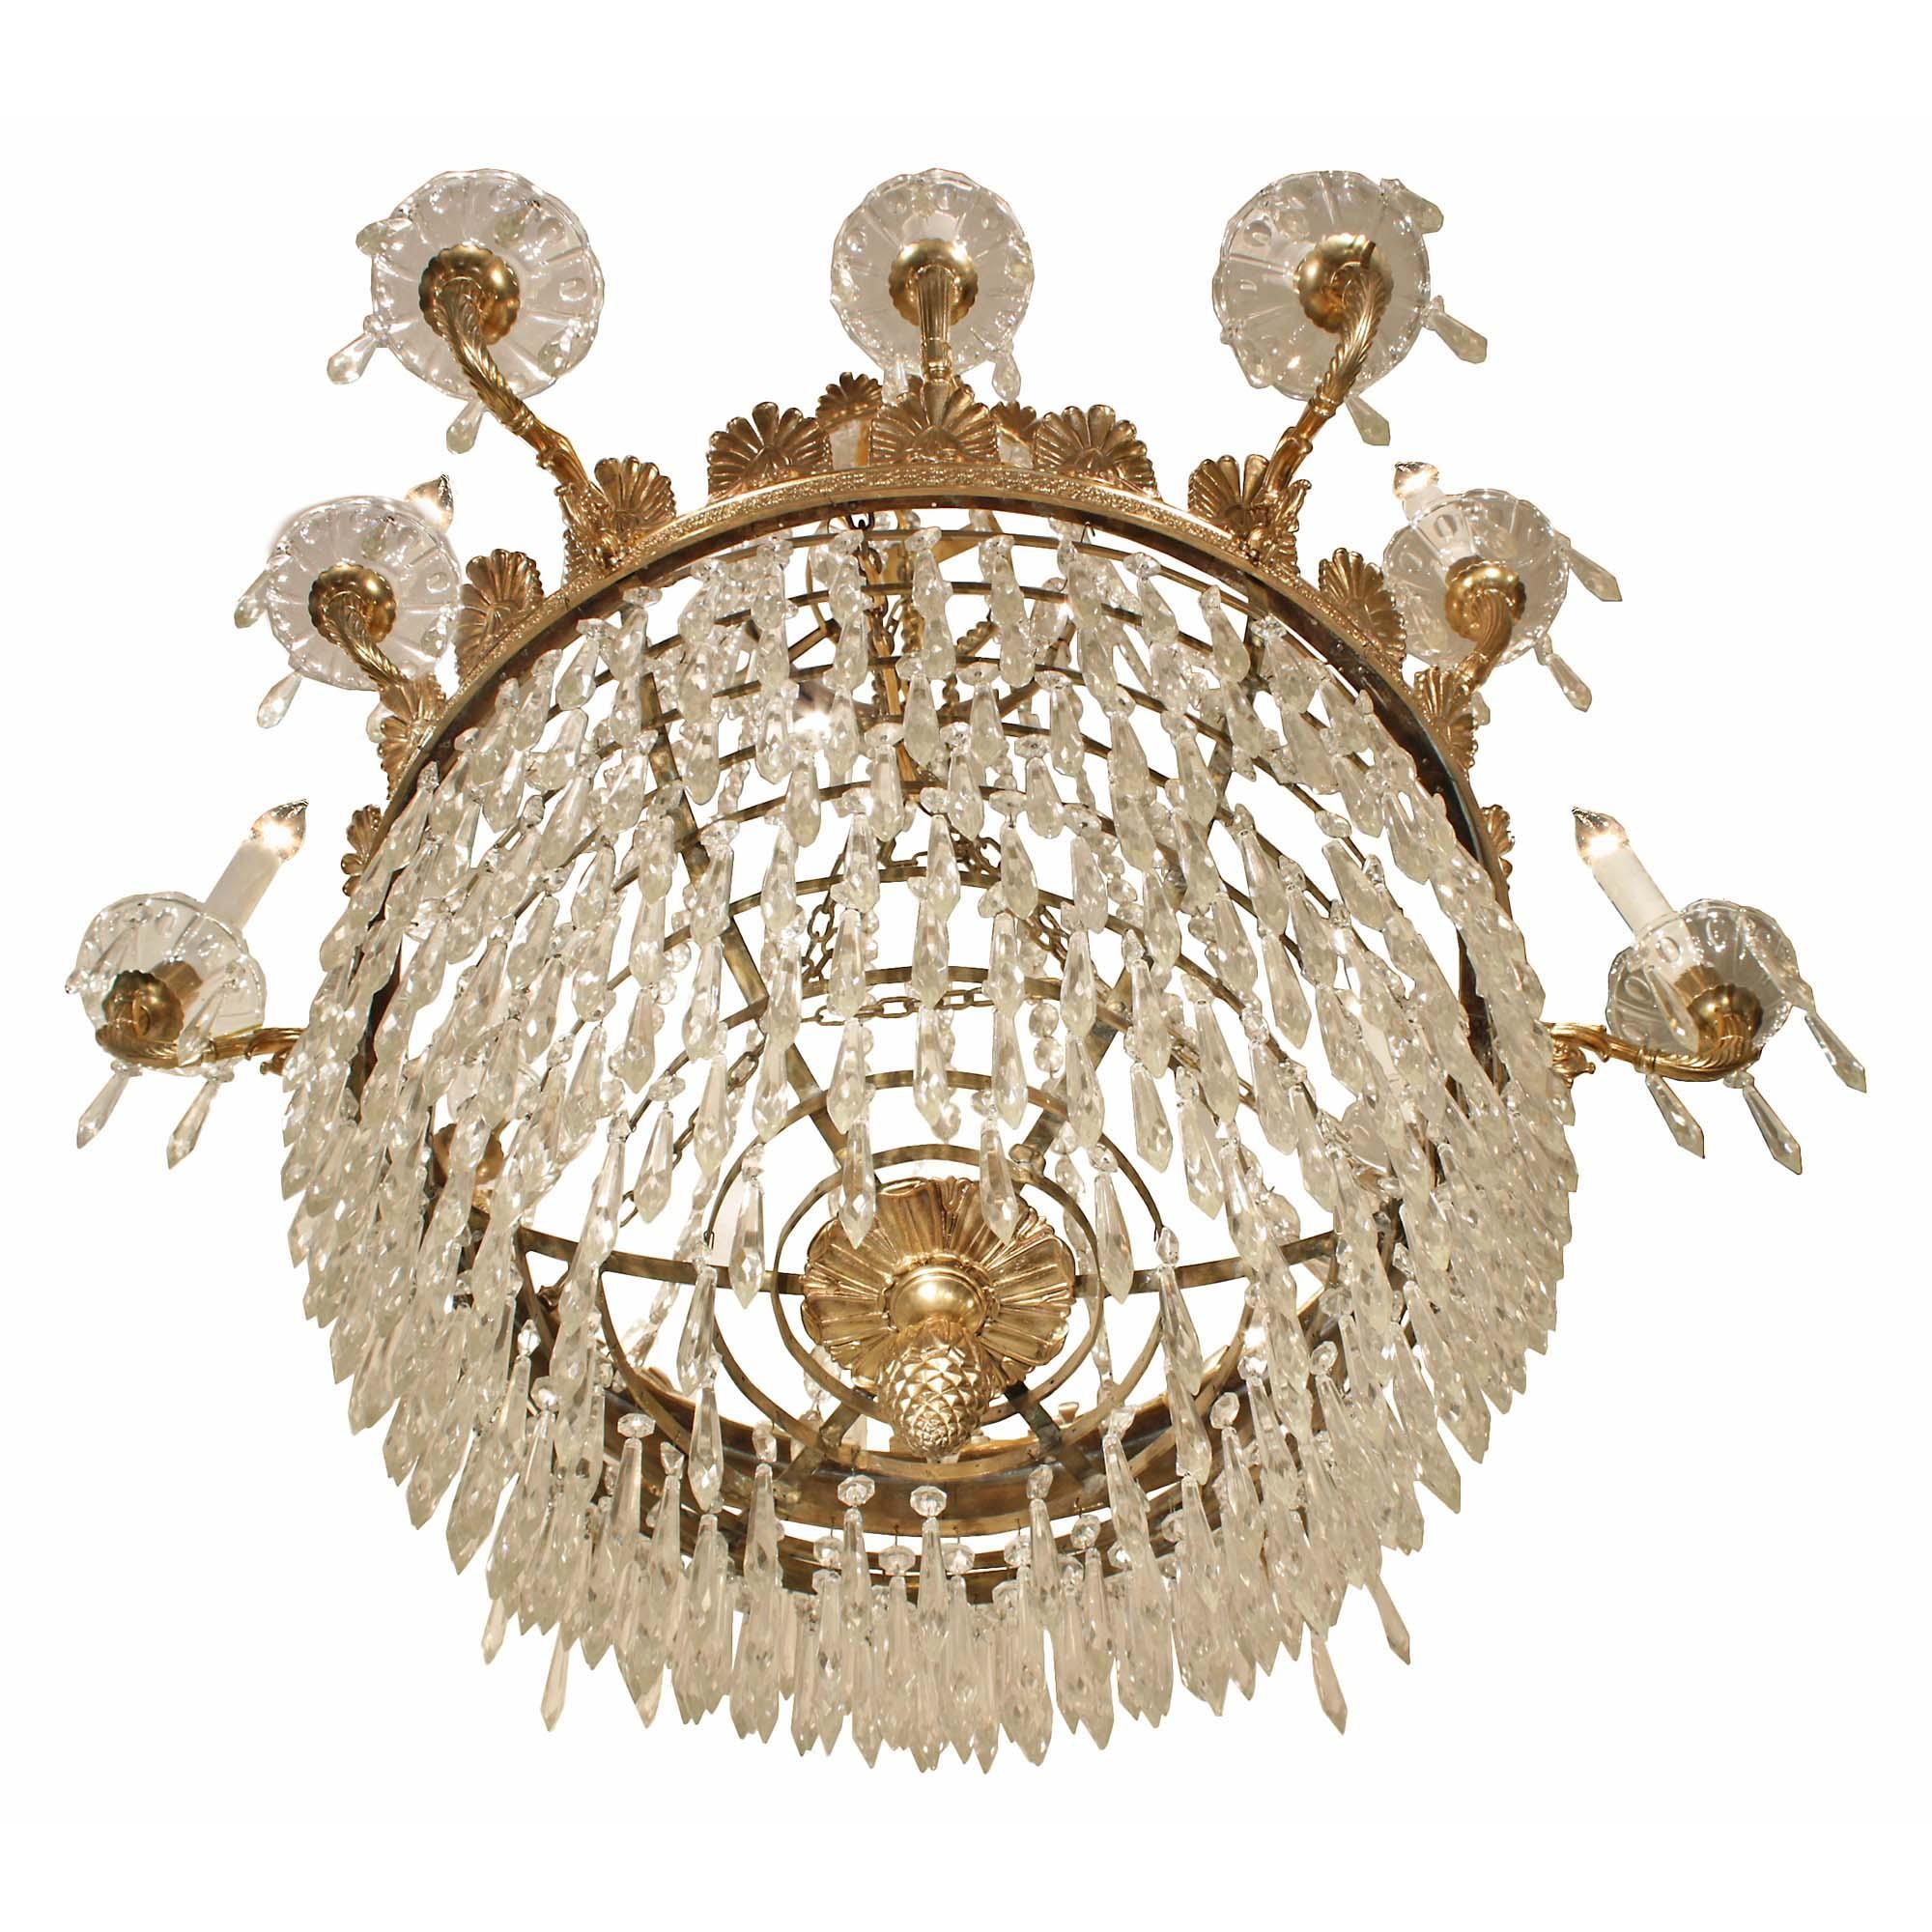 French 19th Century Neoclassical Style Crystal and Ormolu Chandelier For Sale 1